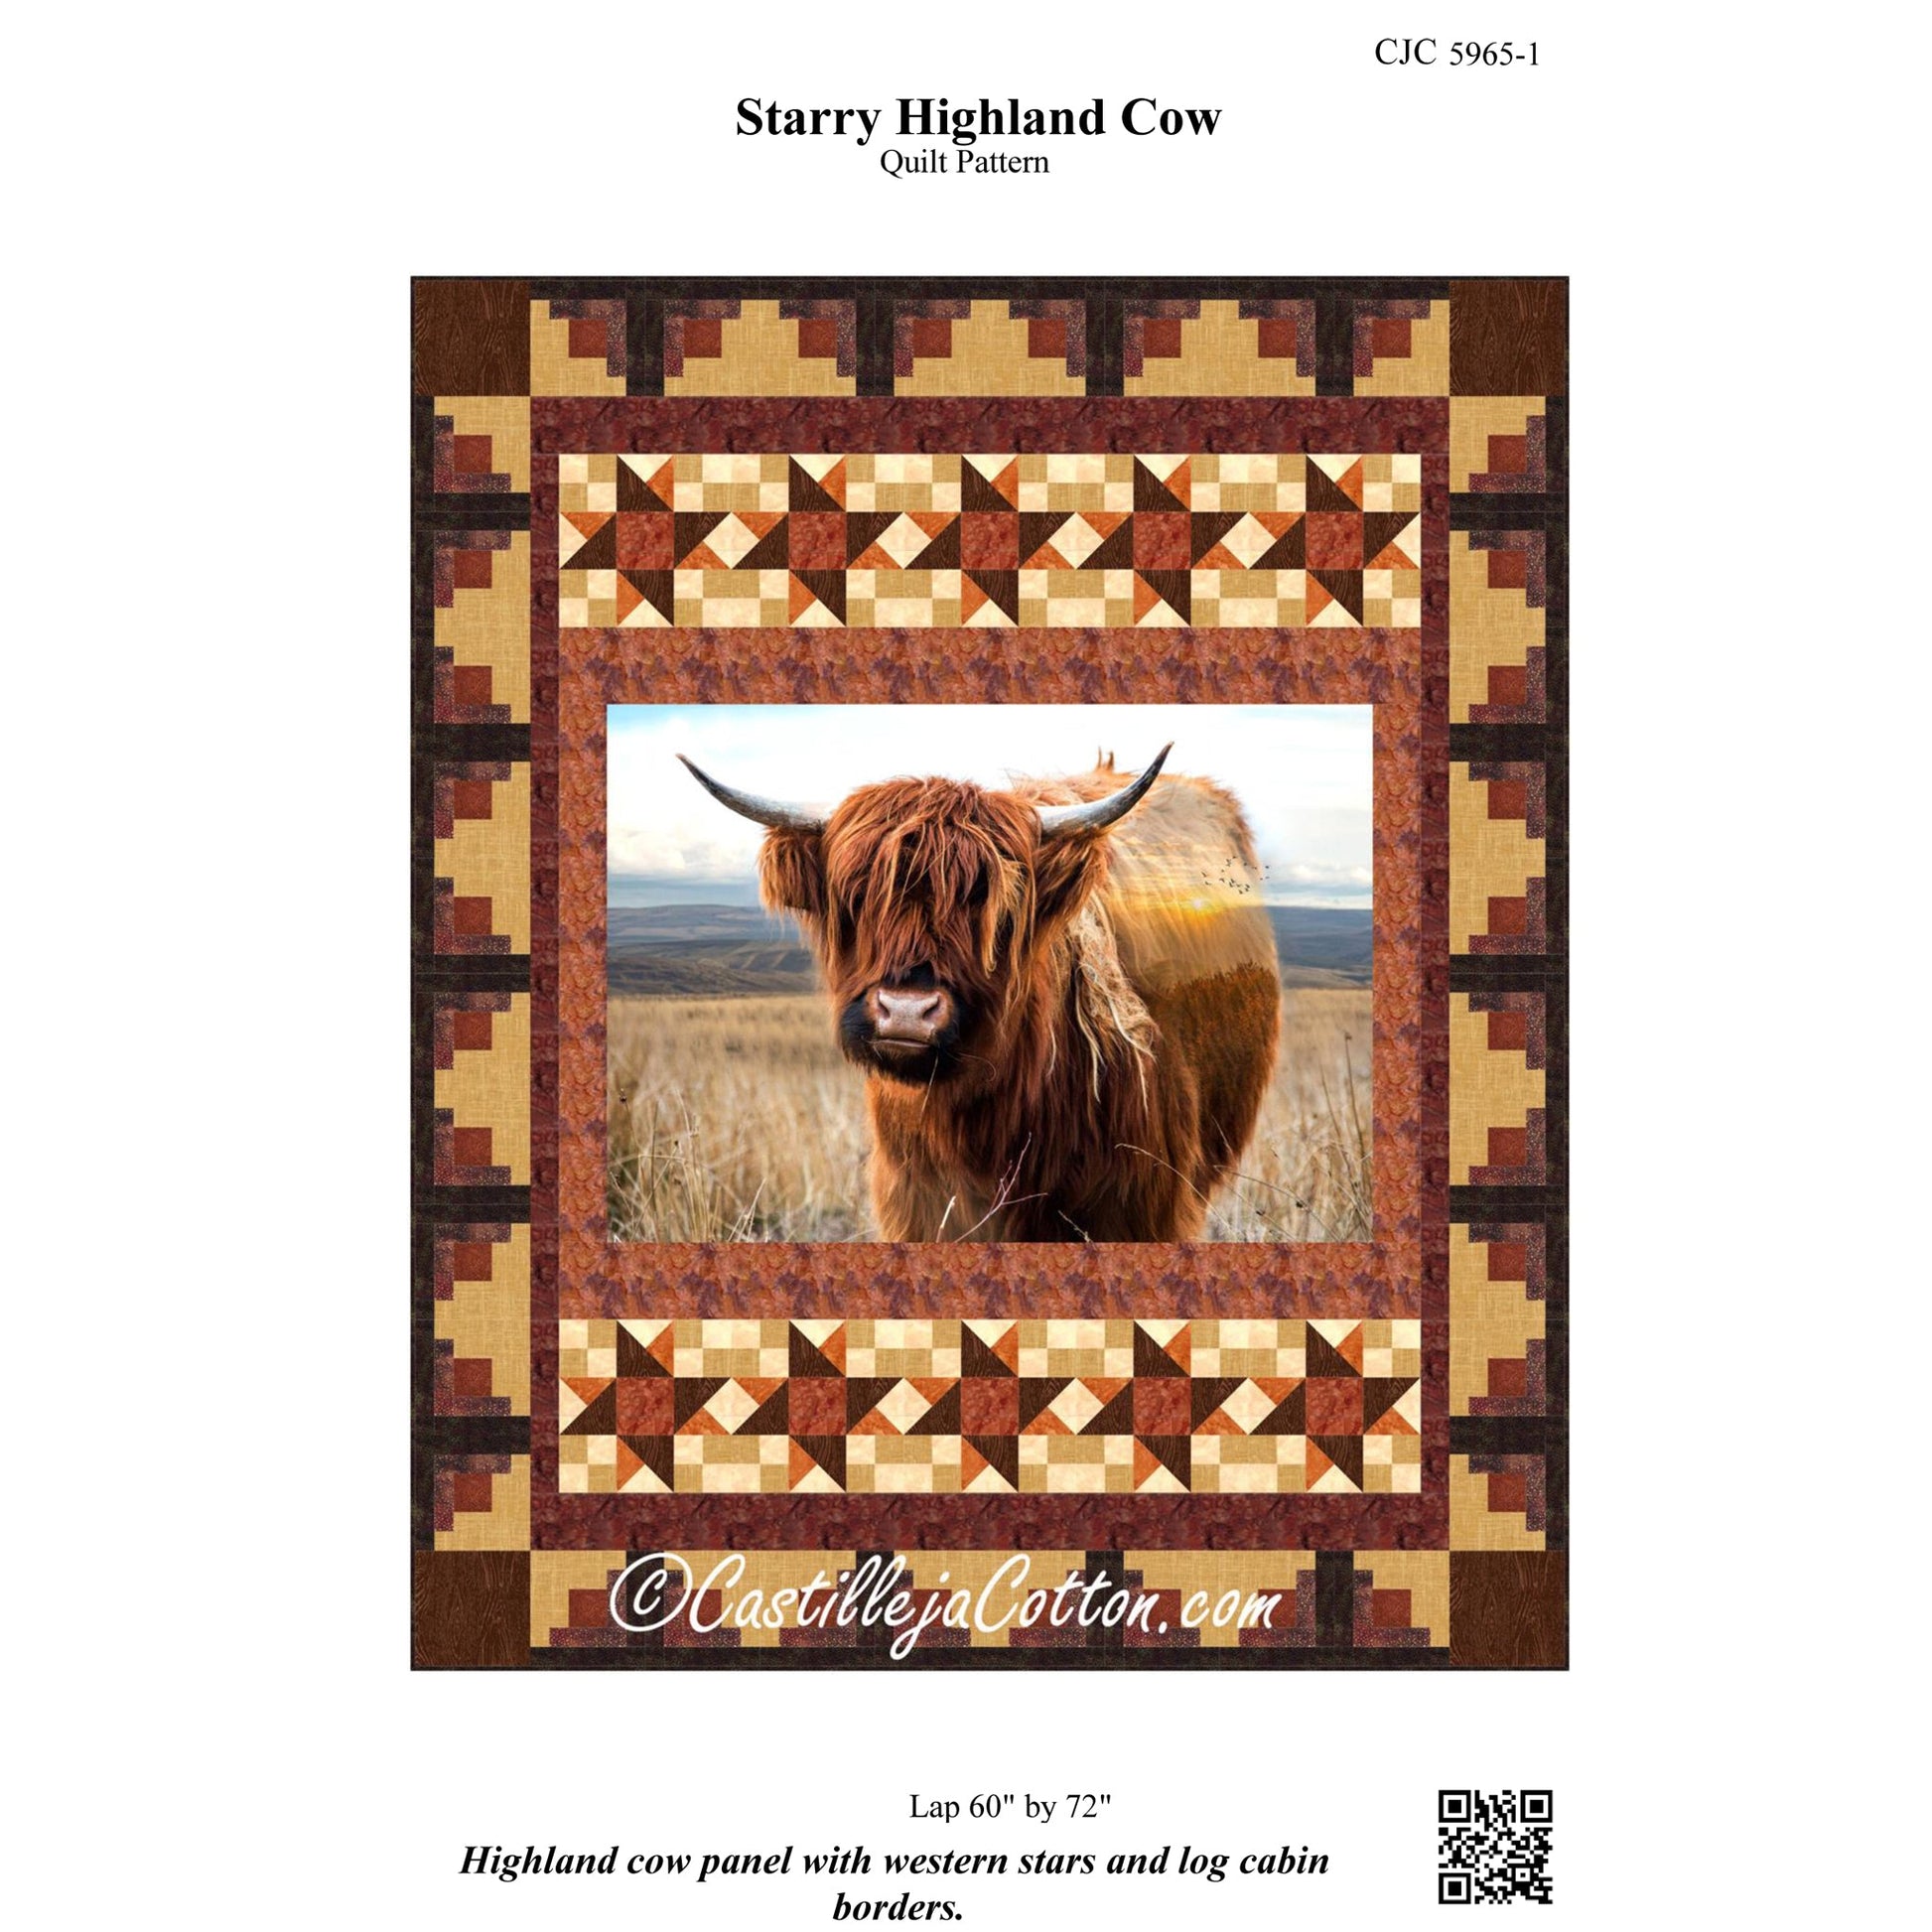 Cover image of pattern for Starry Highland Cow quilt.